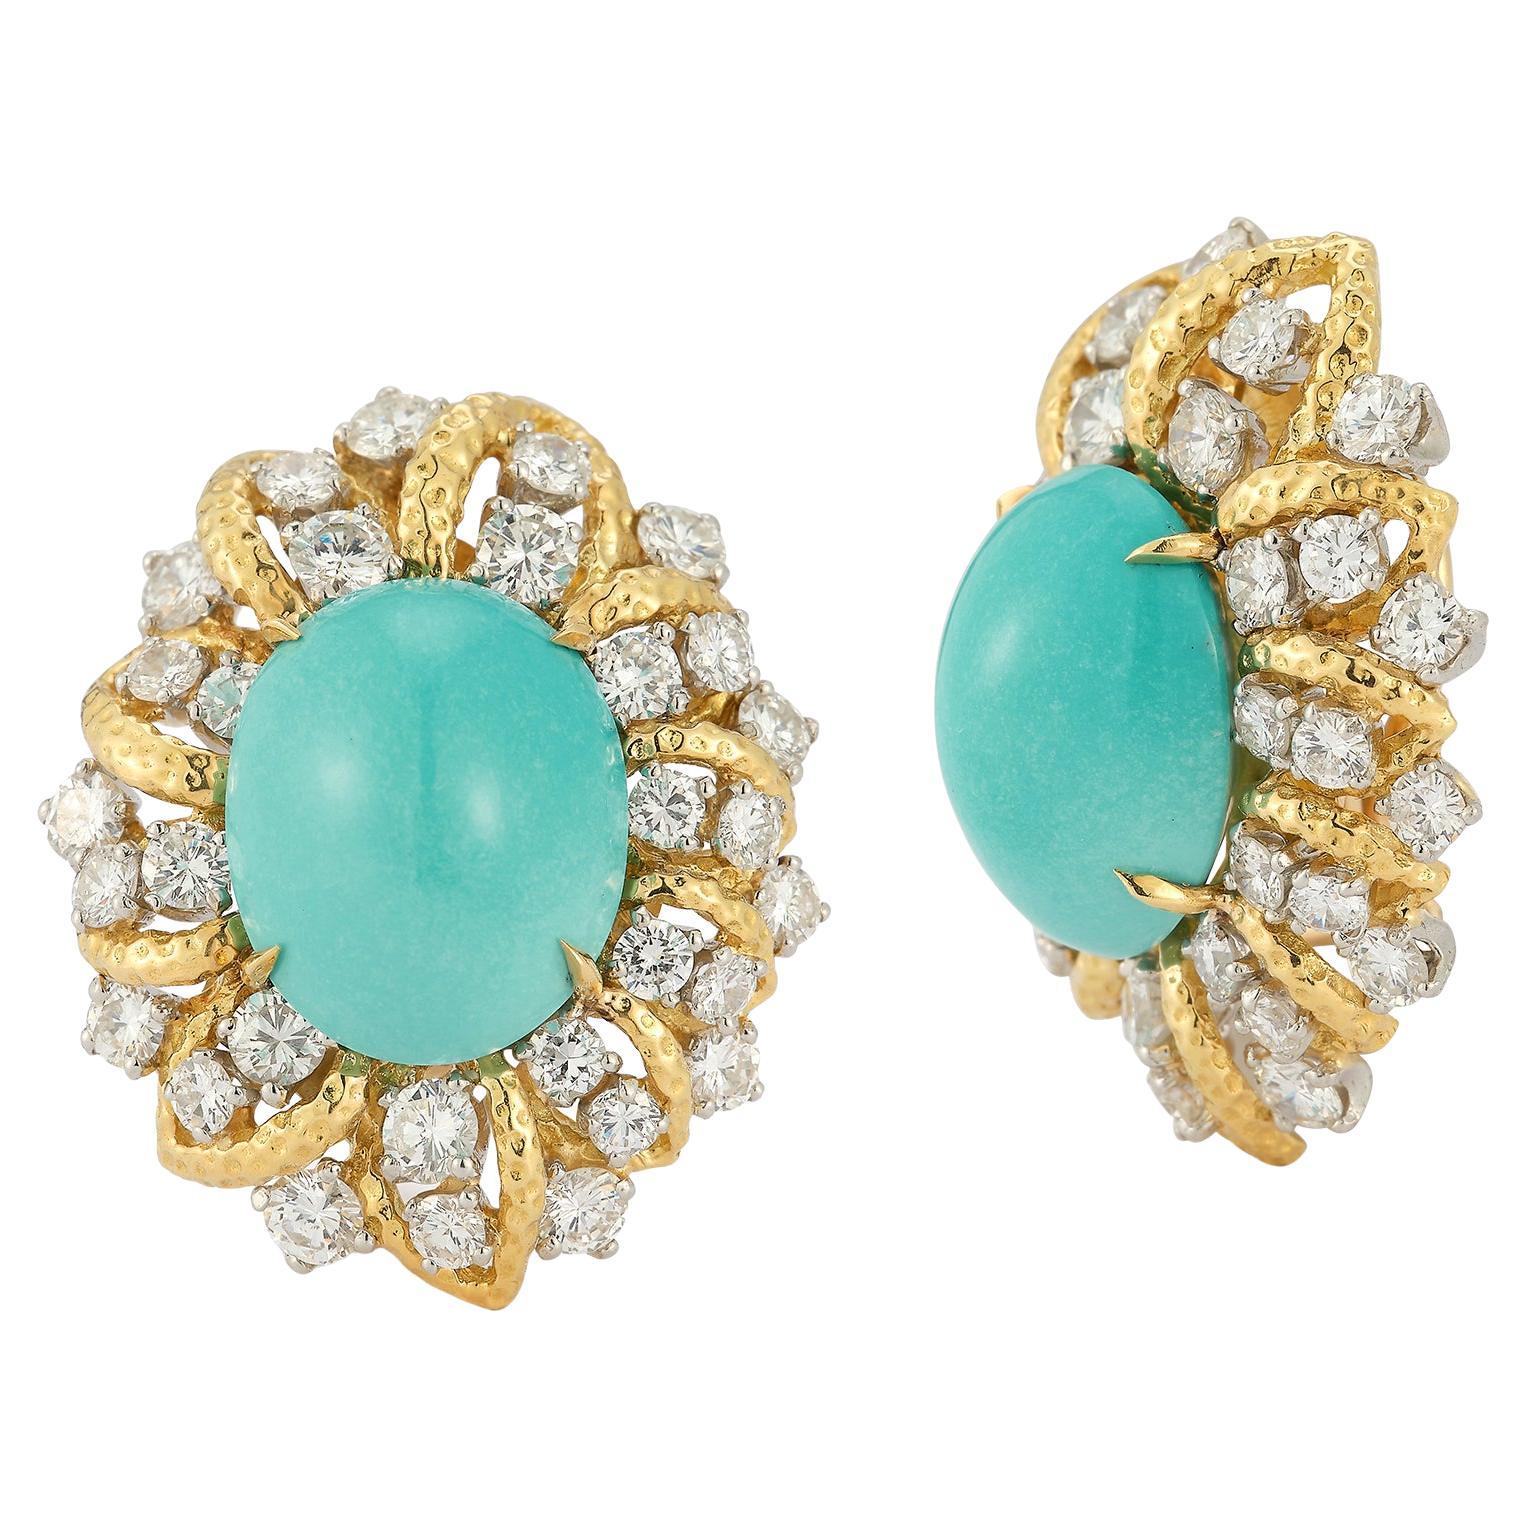 Turquoise and Diamond Earrings by David Webb 

Cabochon turquoise surrounded by round cut diamonds set in 18 karat yellow gold.

Measurements: 1